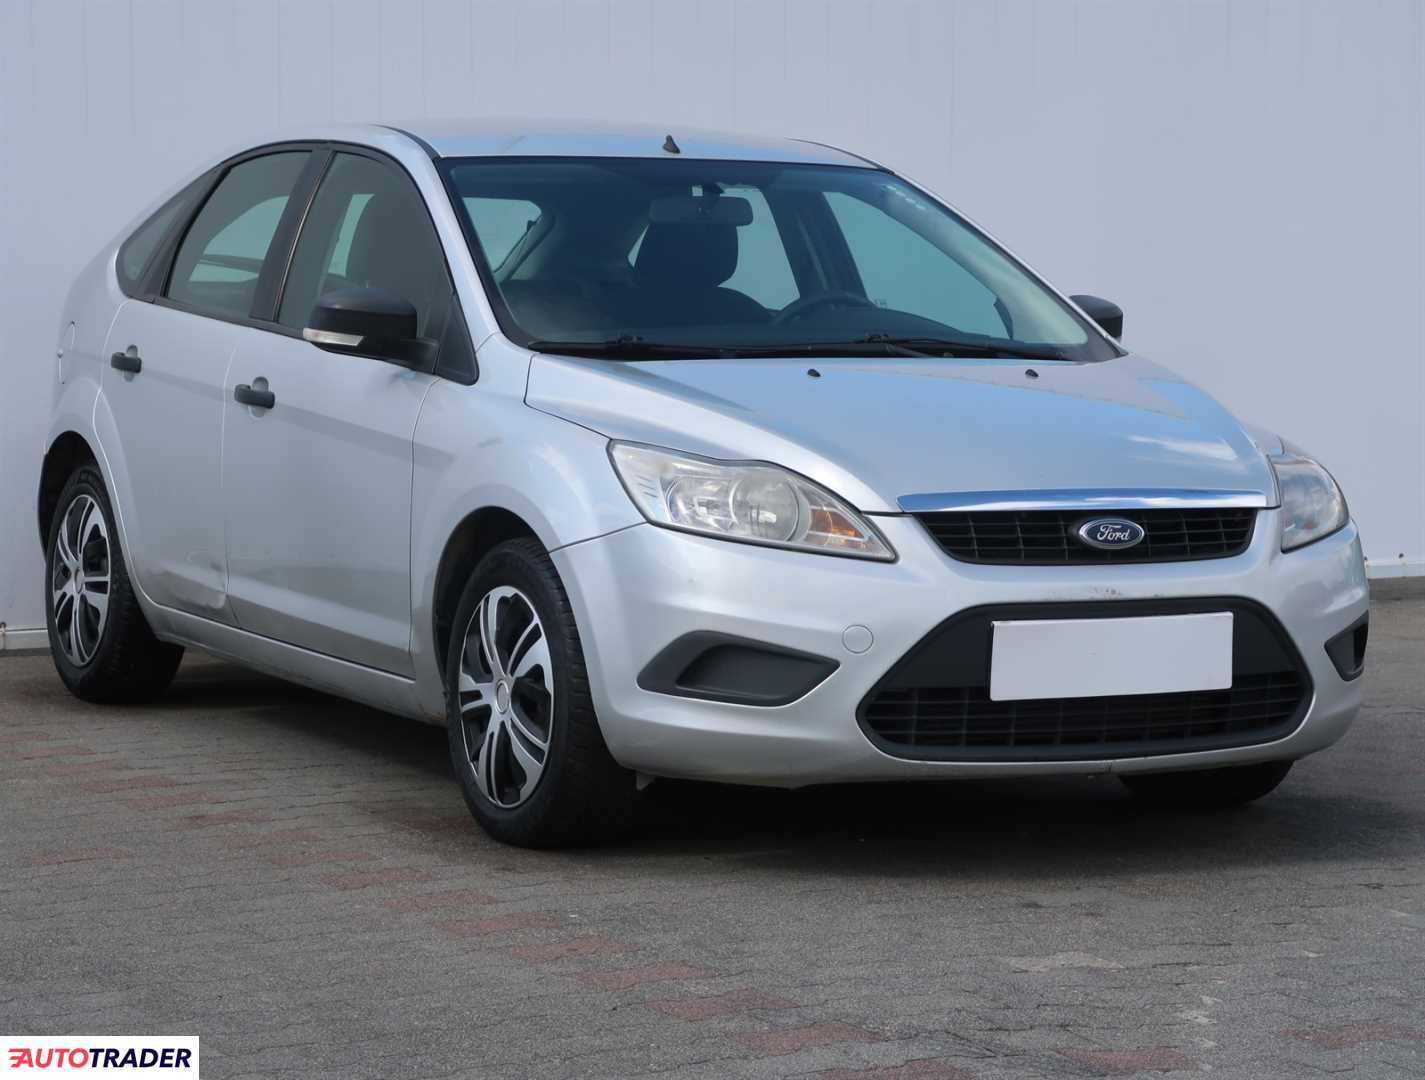 Ford Focus 2009 1.8 113 KM